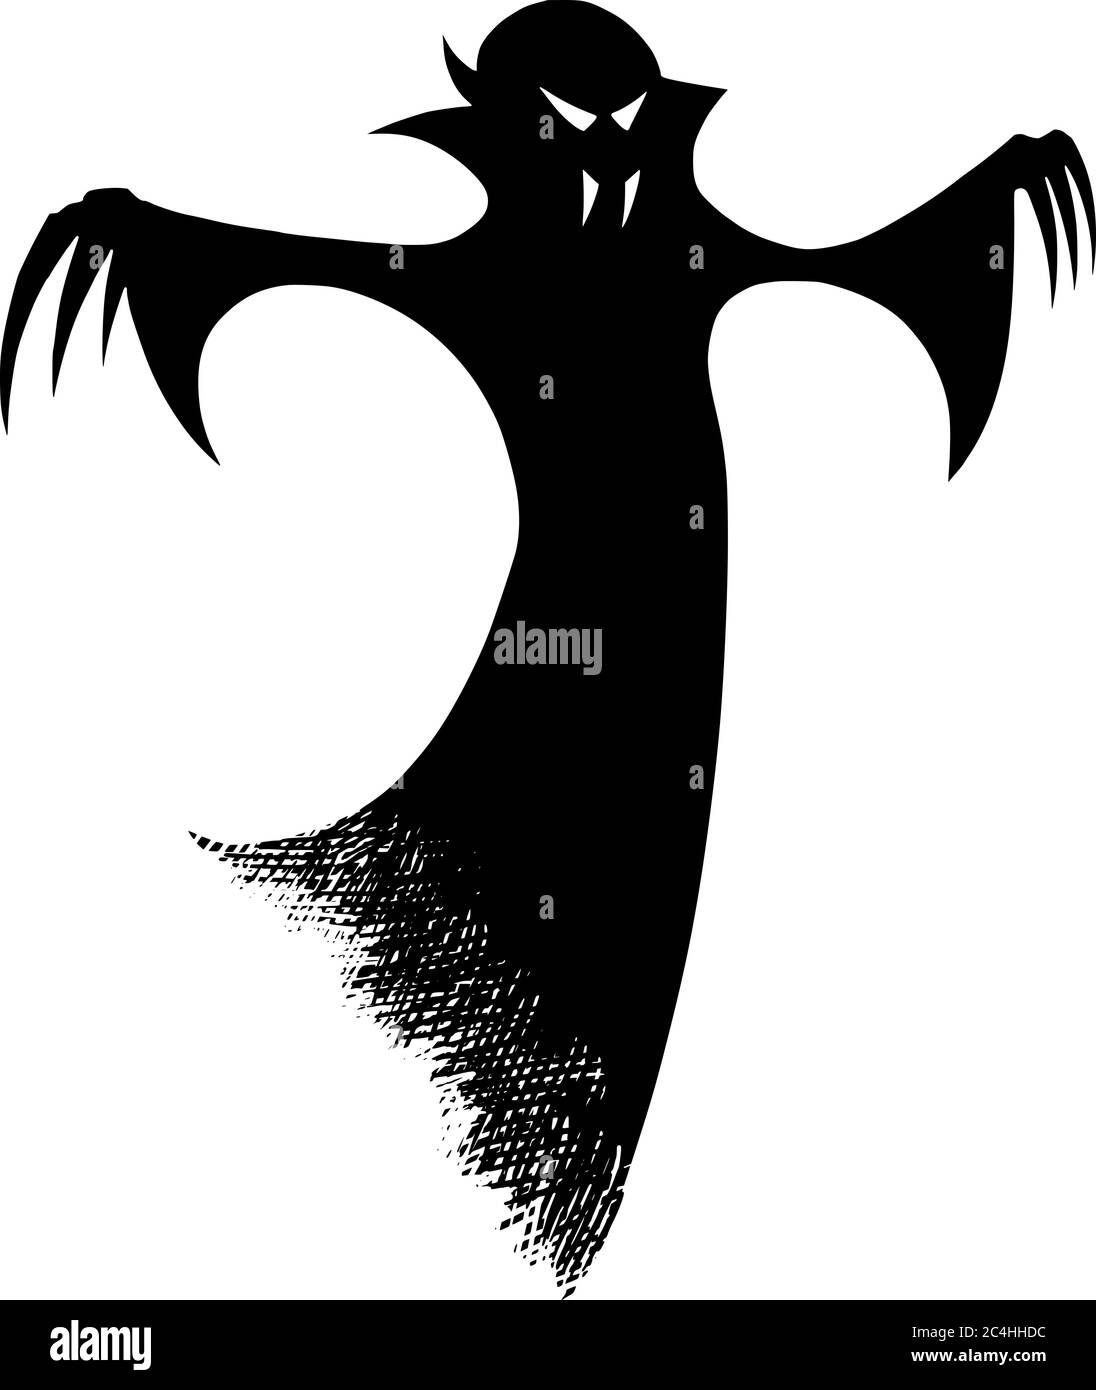 Vector drawing illustration of black silhouette of creepy or spooky Halloween ghost or undead vampire on white background. Stock Vector